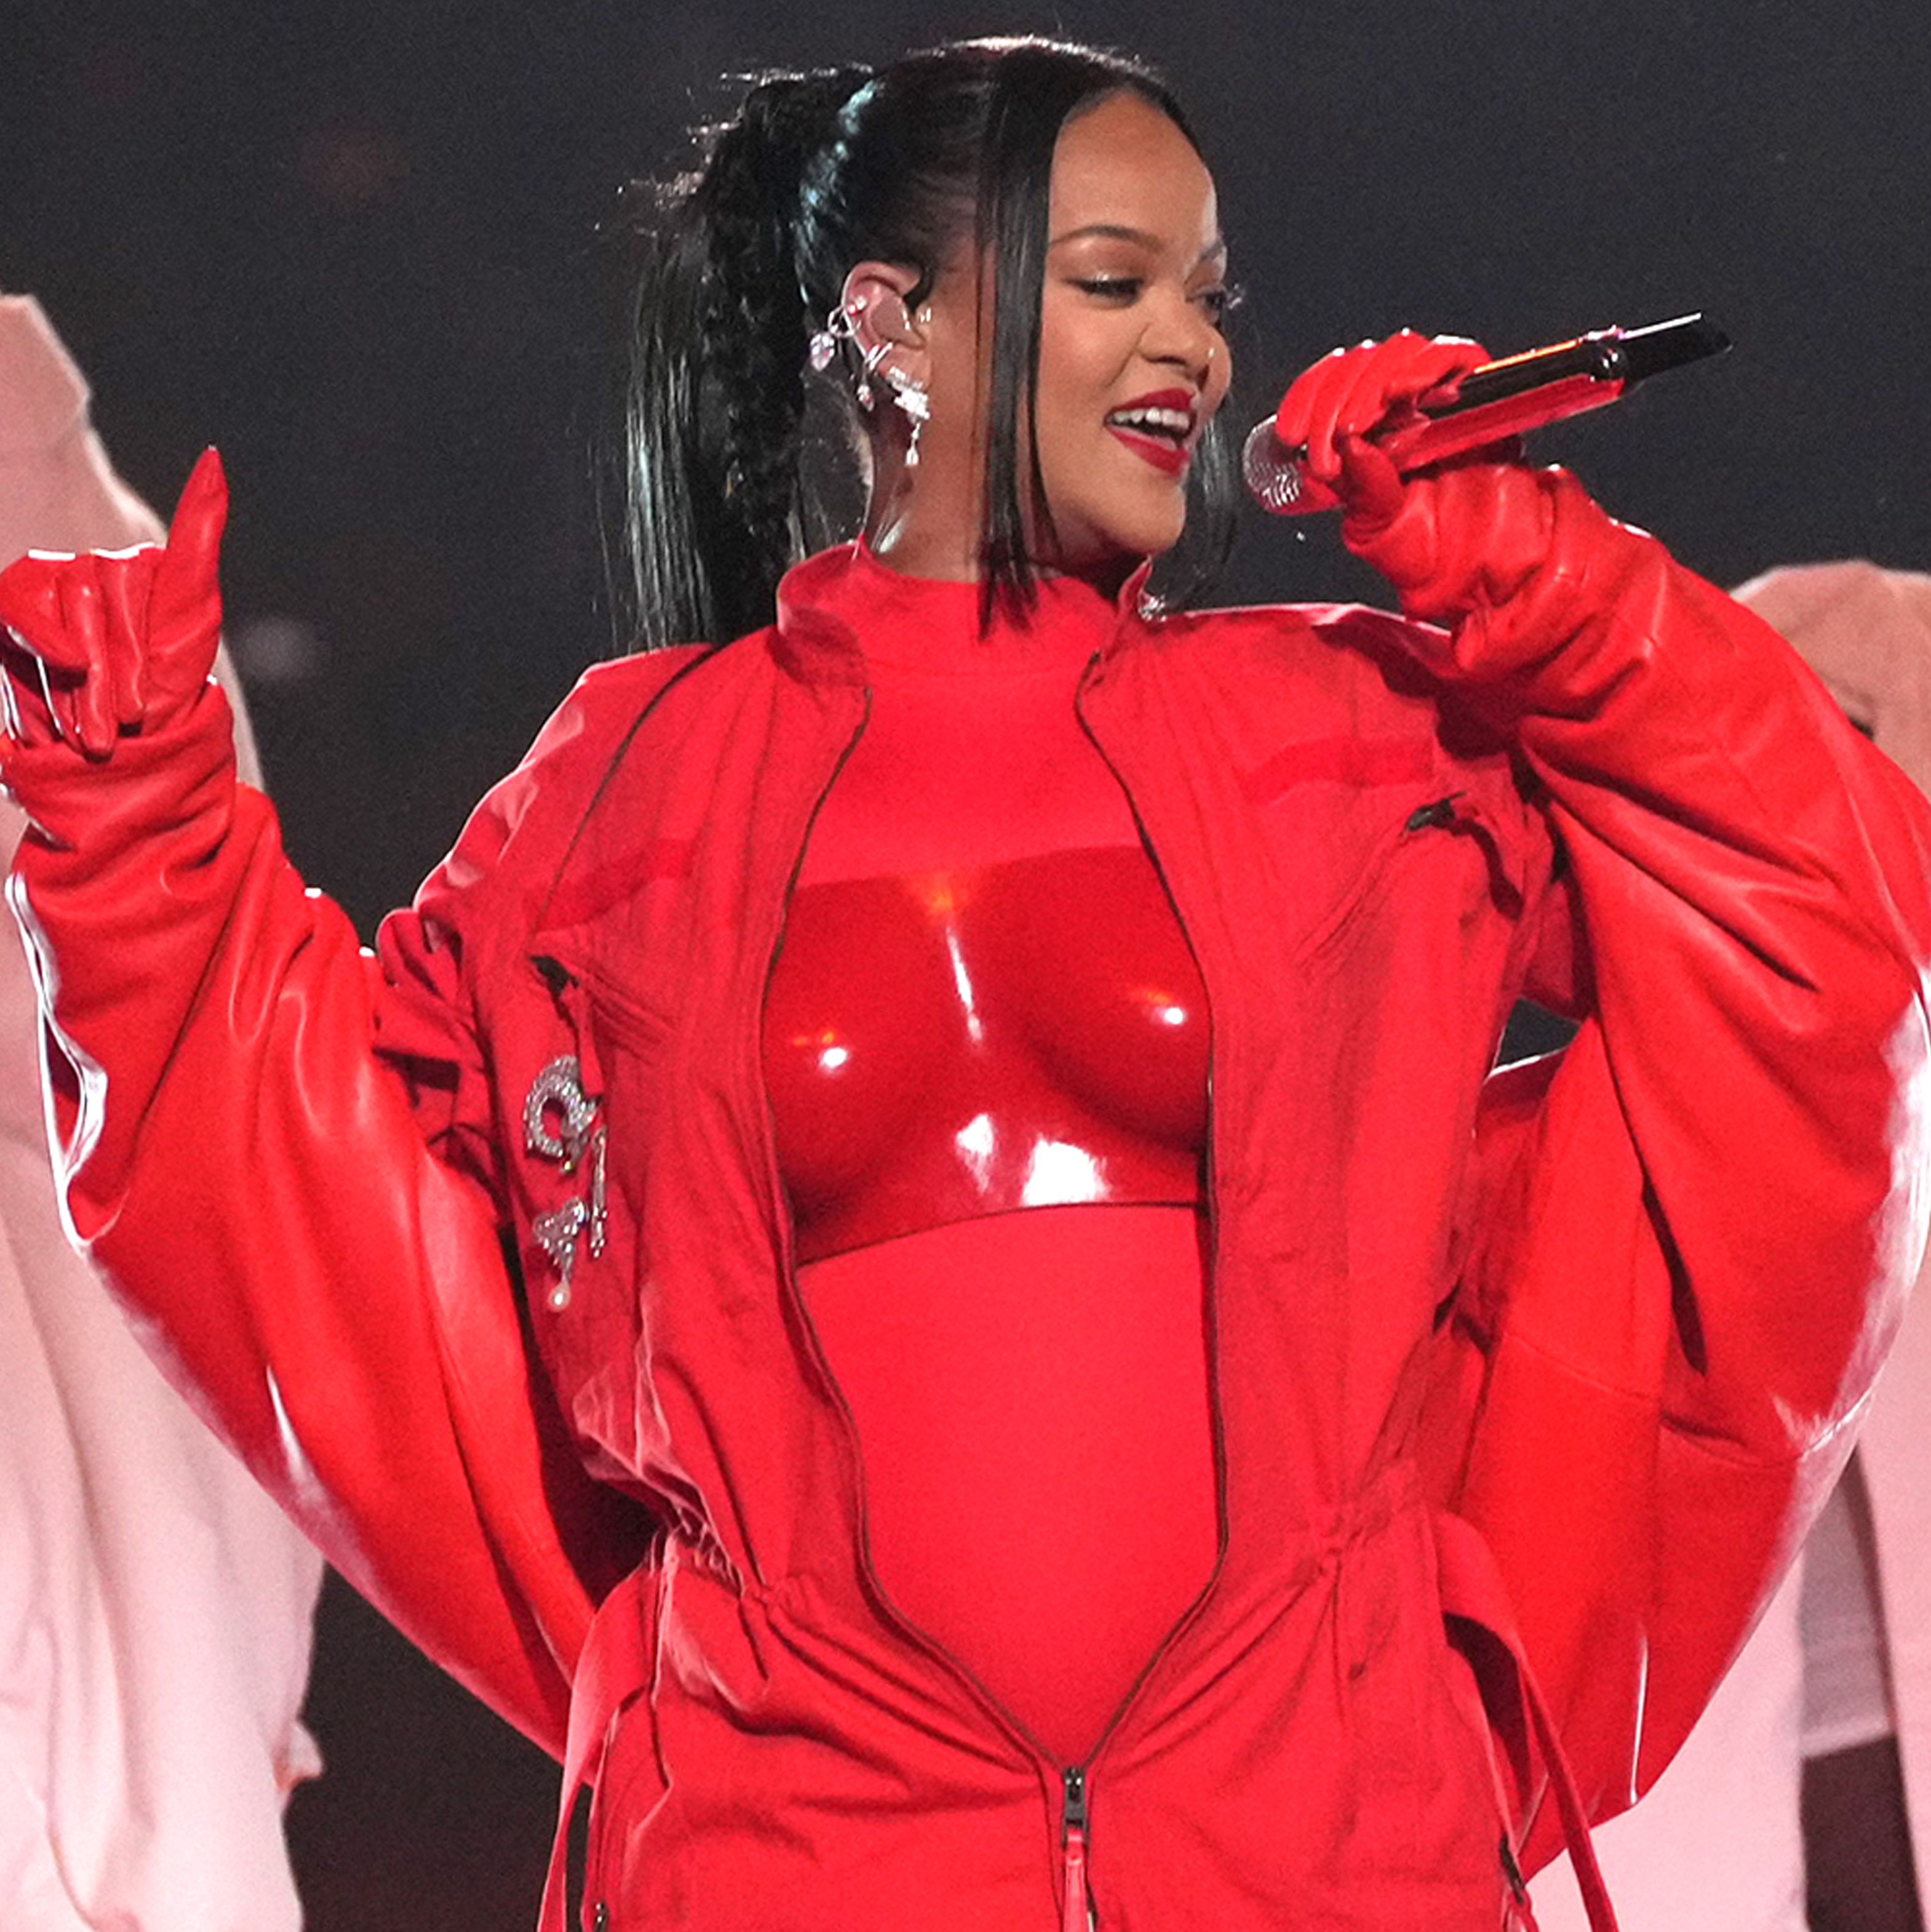 Rihanna's Super Bowl Performance Ended Up Helping a Guy in Arizona Pay for Two Years of His Mortgage